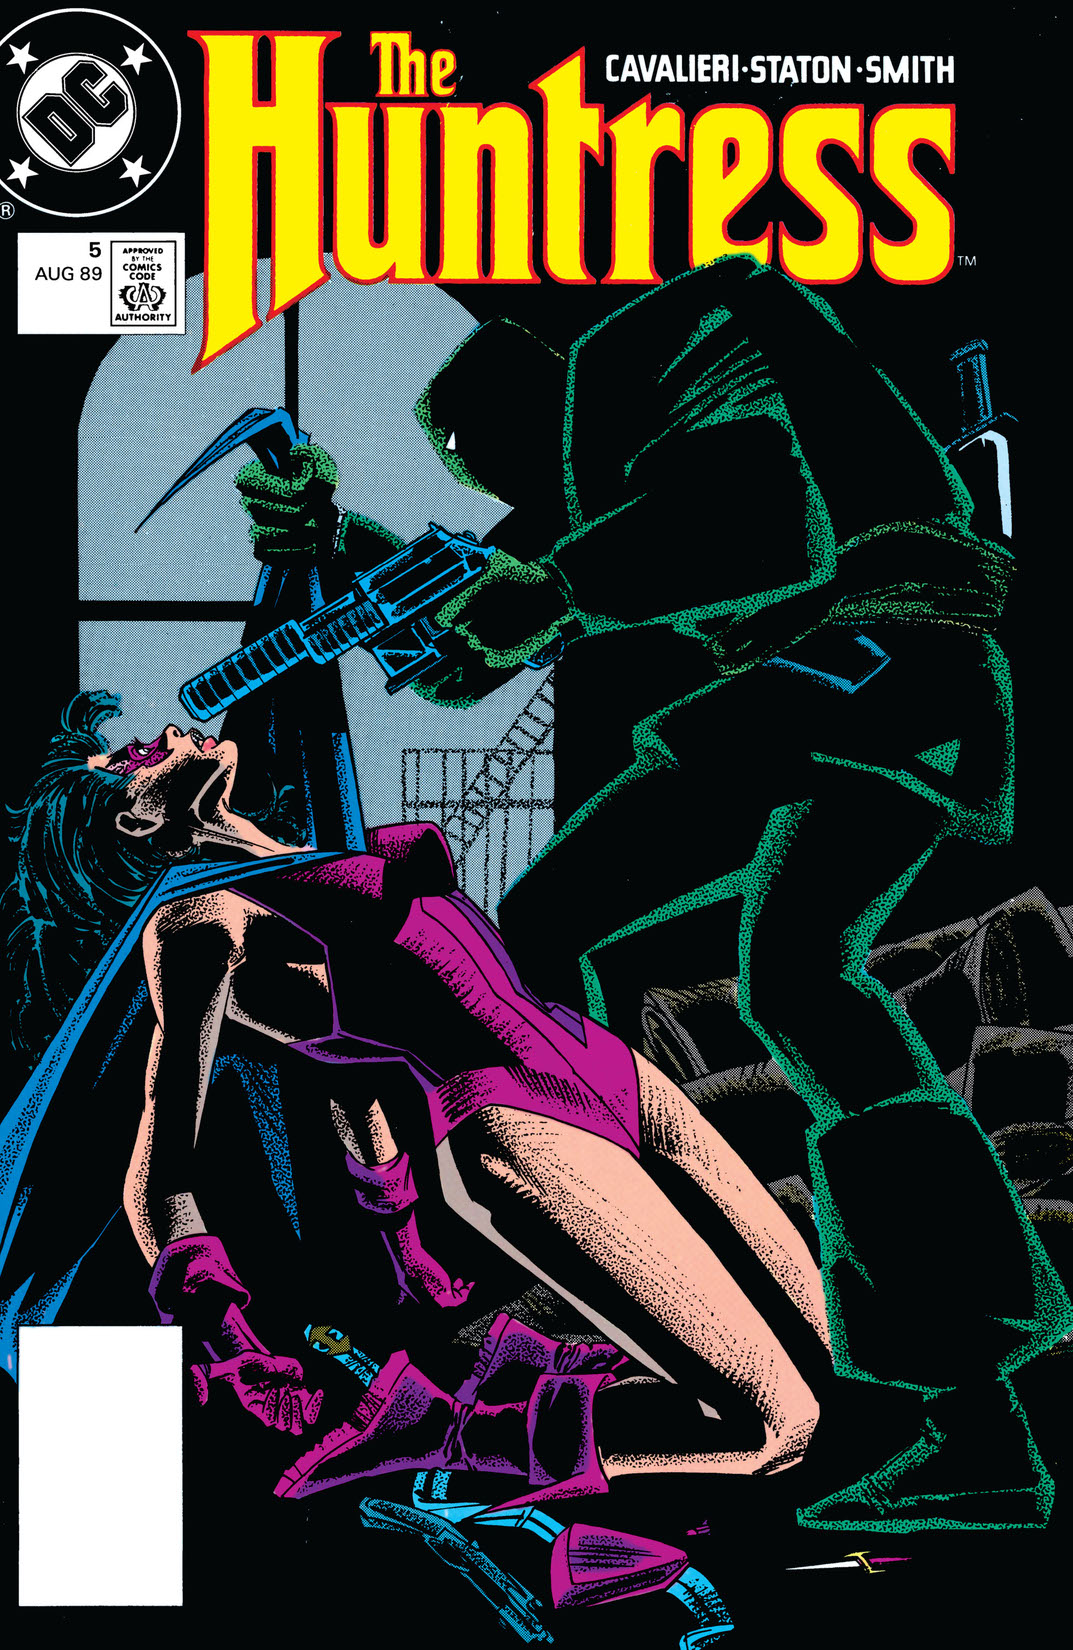 The Huntress (1989-) #5 preview images